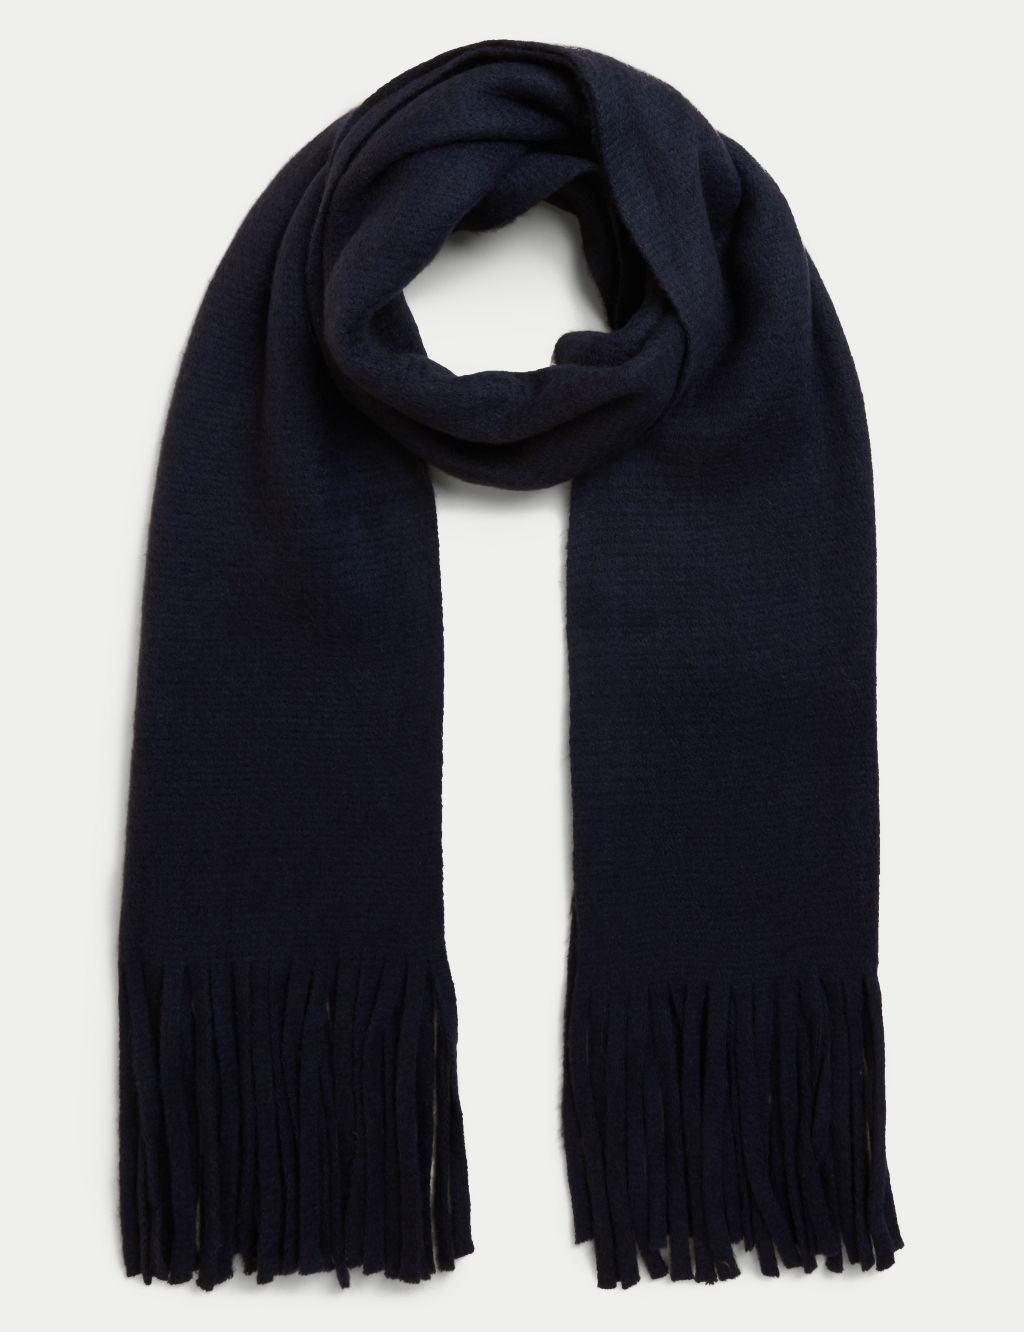 Knitted Tassel Scarf image 1